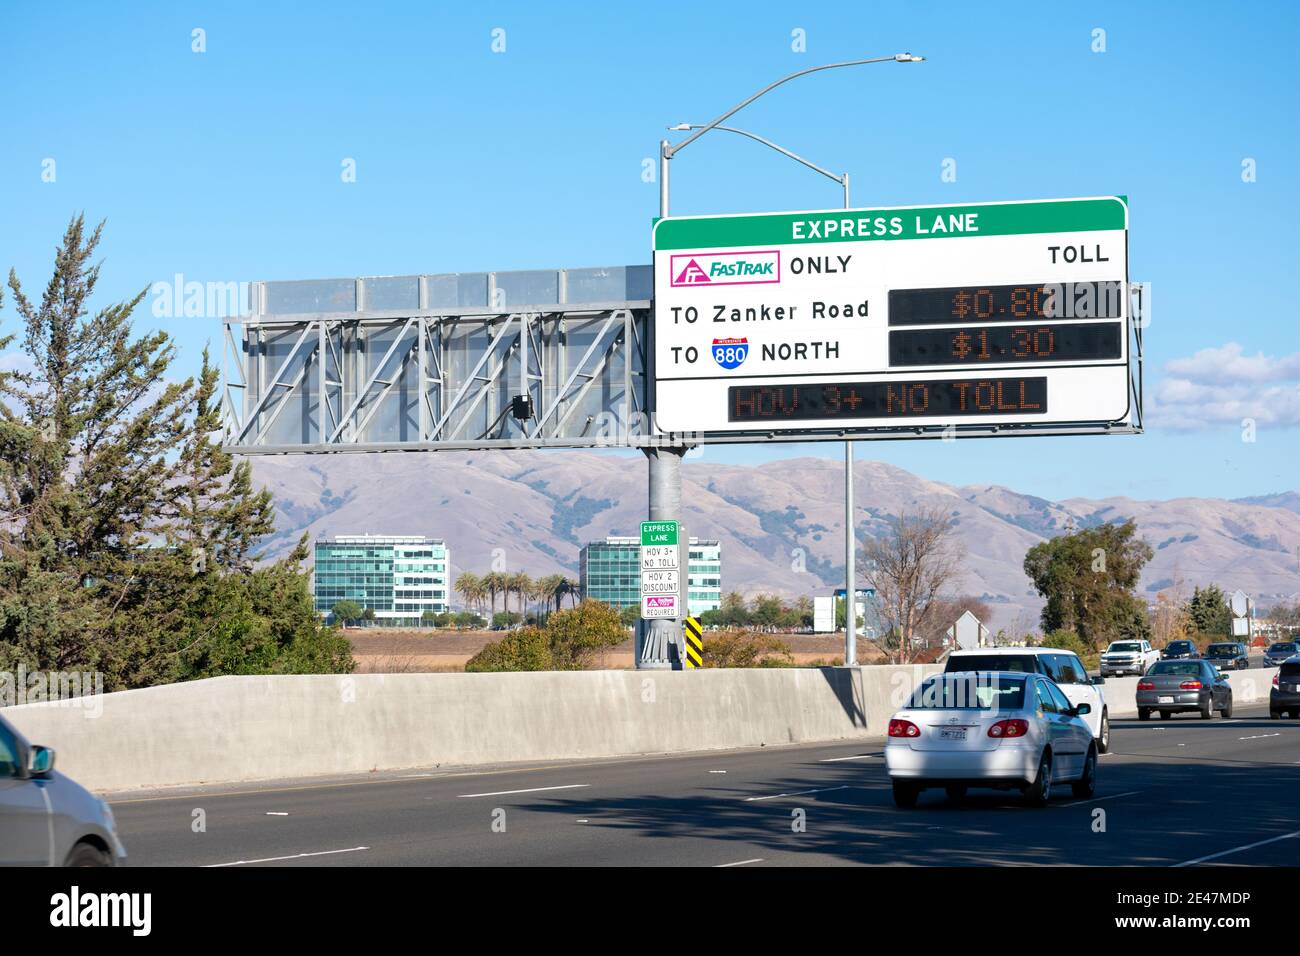 FasTrak express lane sign on highway. FasTrak is an electronic toll collection ETC system on toll roads, bridges, and high-occupancy toll lanes in Cal Stock Photo